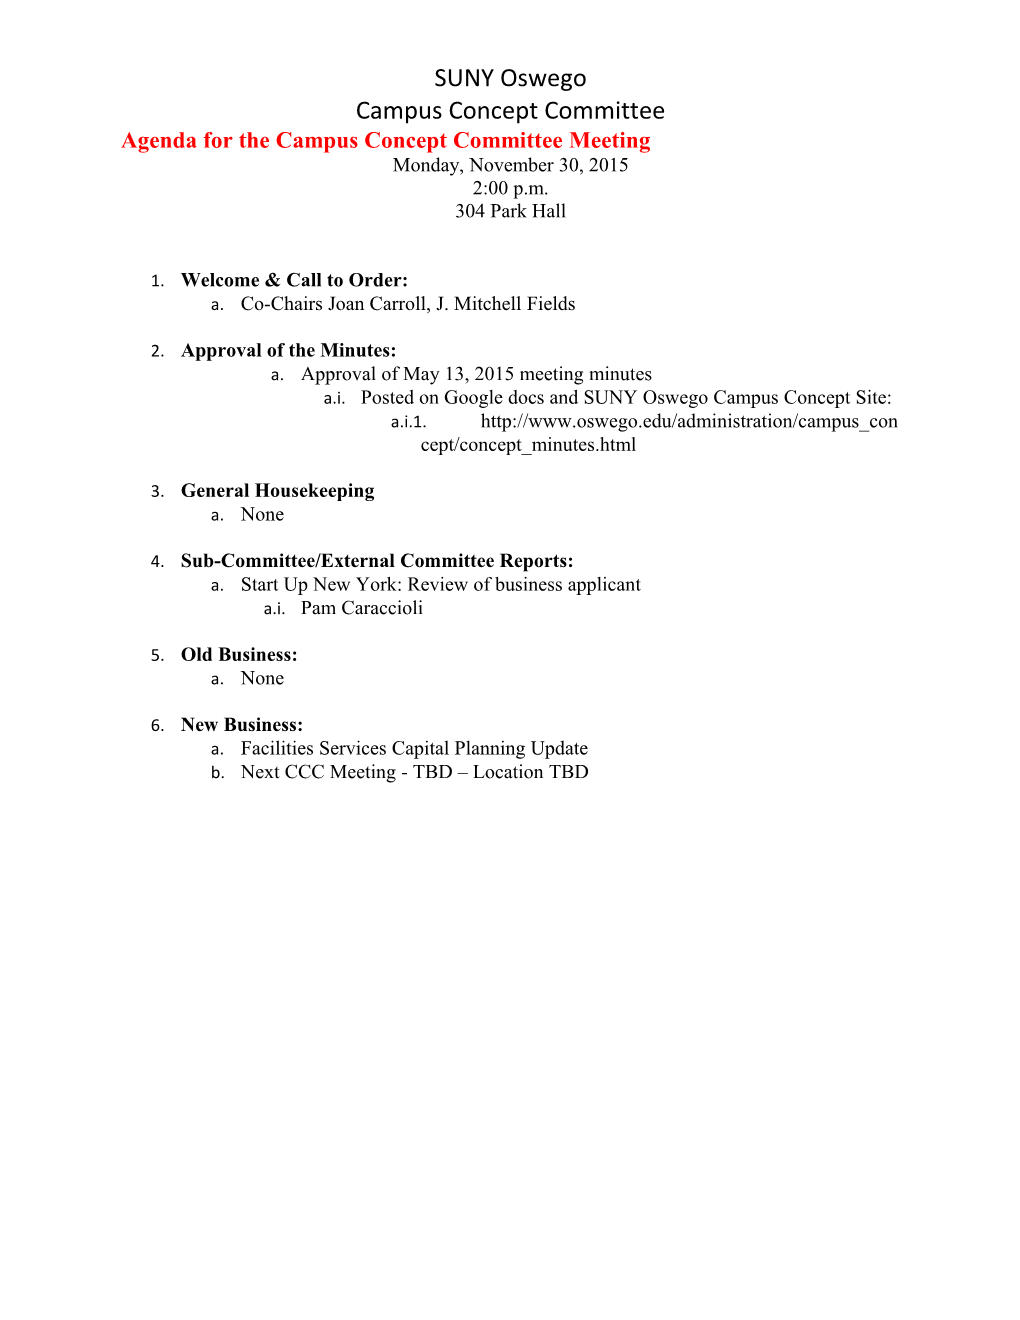 Agenda for the Campus Concept Committee Meeting